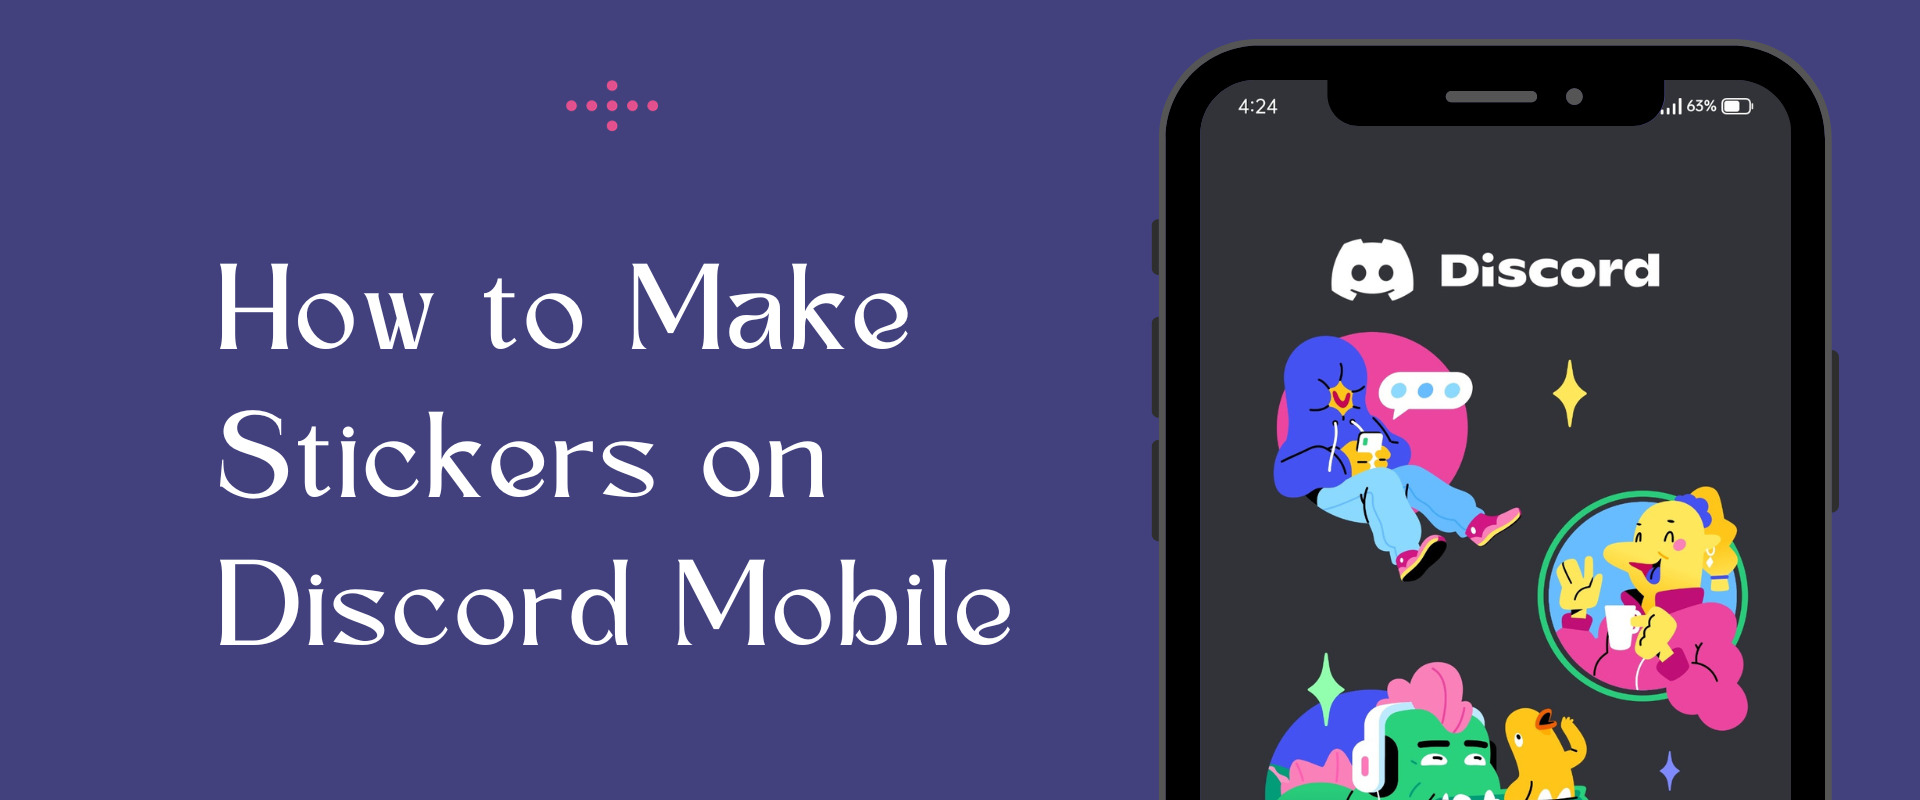 how to make stickers on discord mobile